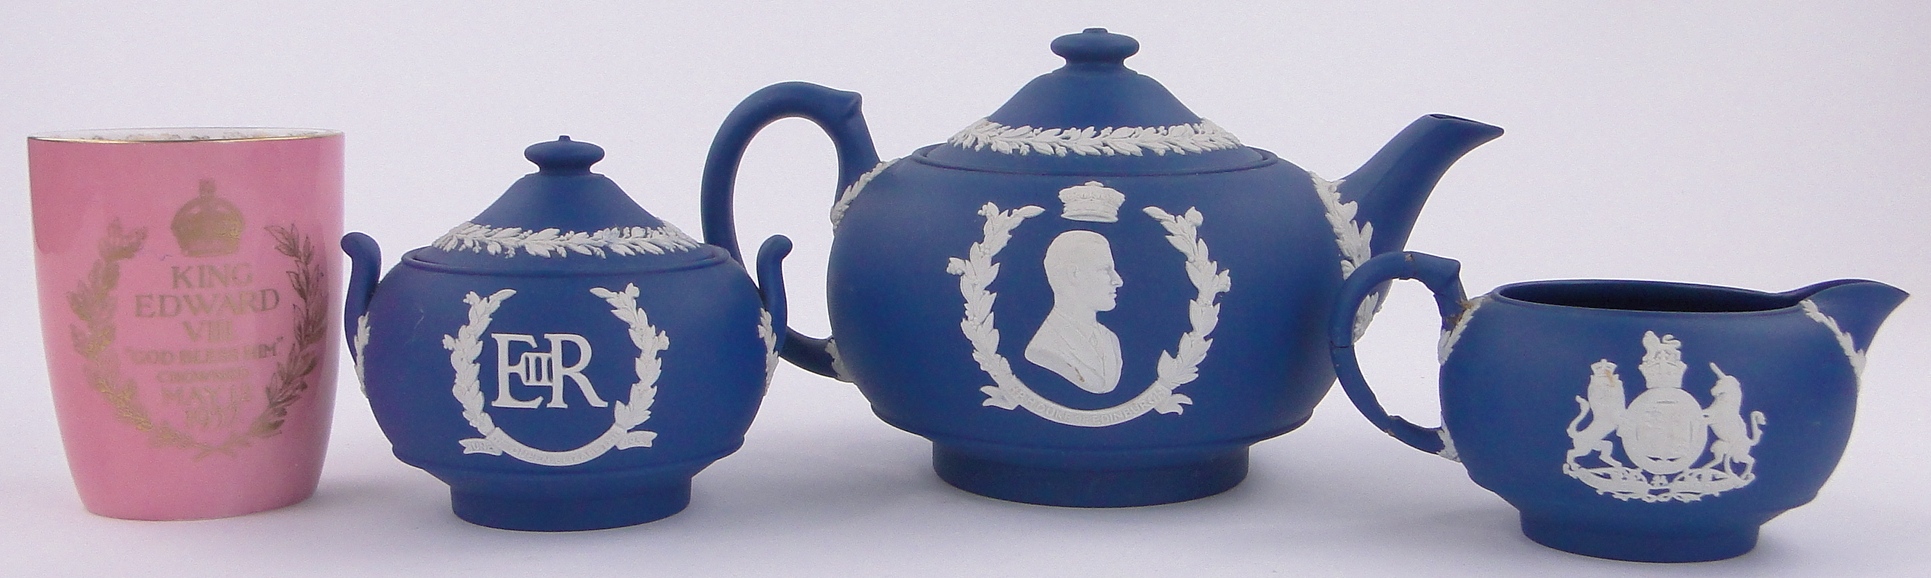 A Wedgwood Jasperware 3-piece Commemorative teaset and a Doulton 1937 Coronation Ware cup, (4). - Image 2 of 3